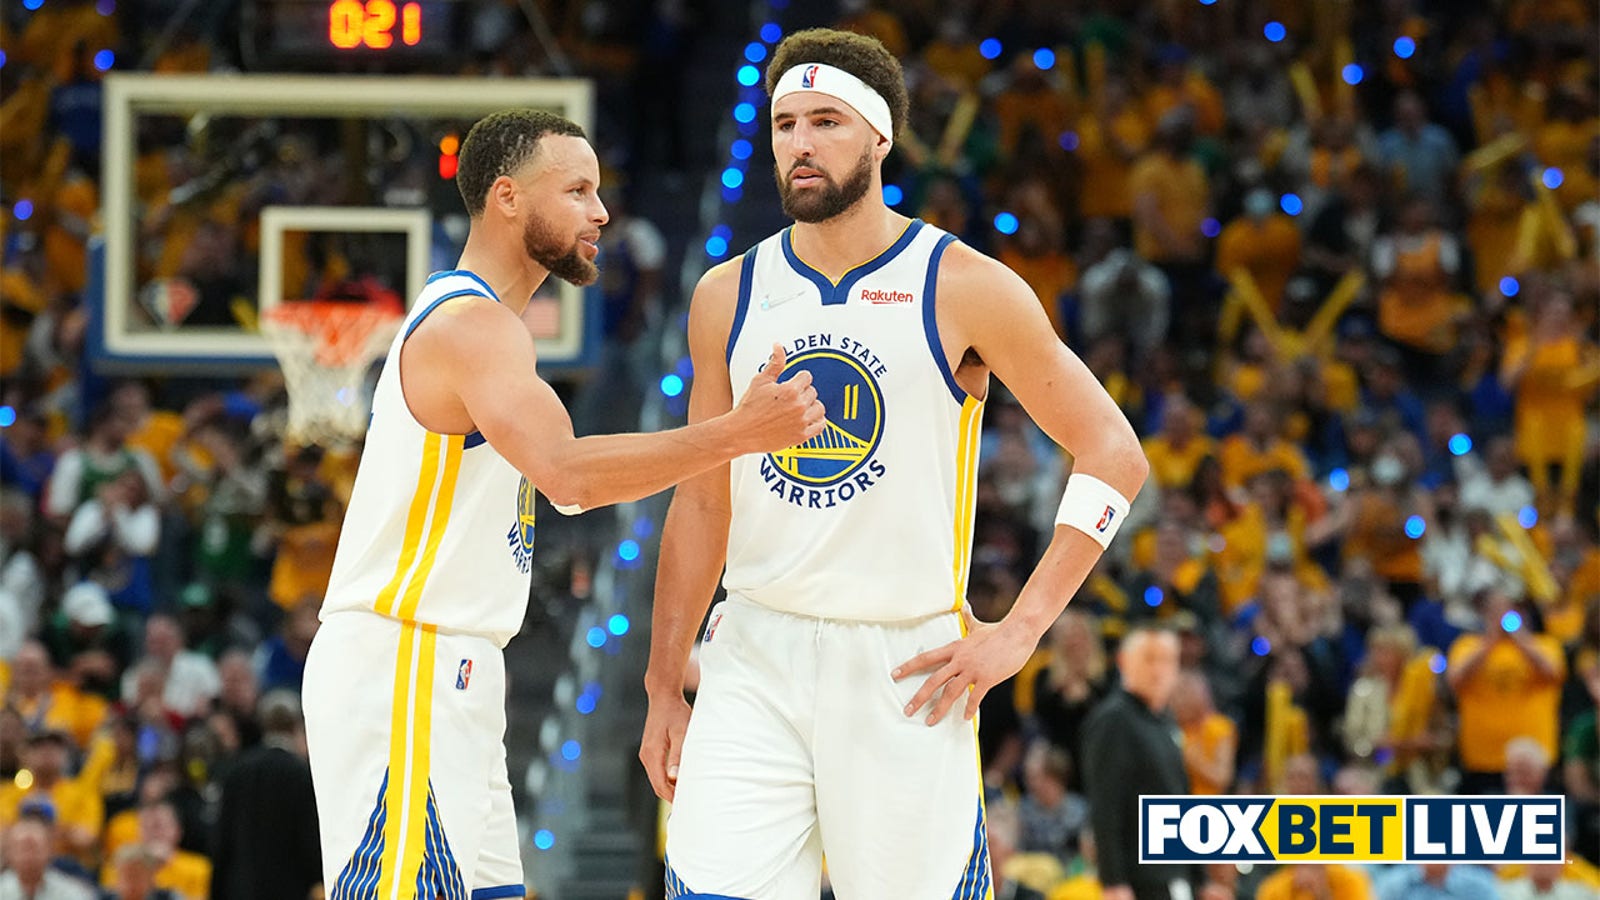 Bet on the Warriors to win the NBA Finals, Colin Cowherd says I FOX BET LIVE